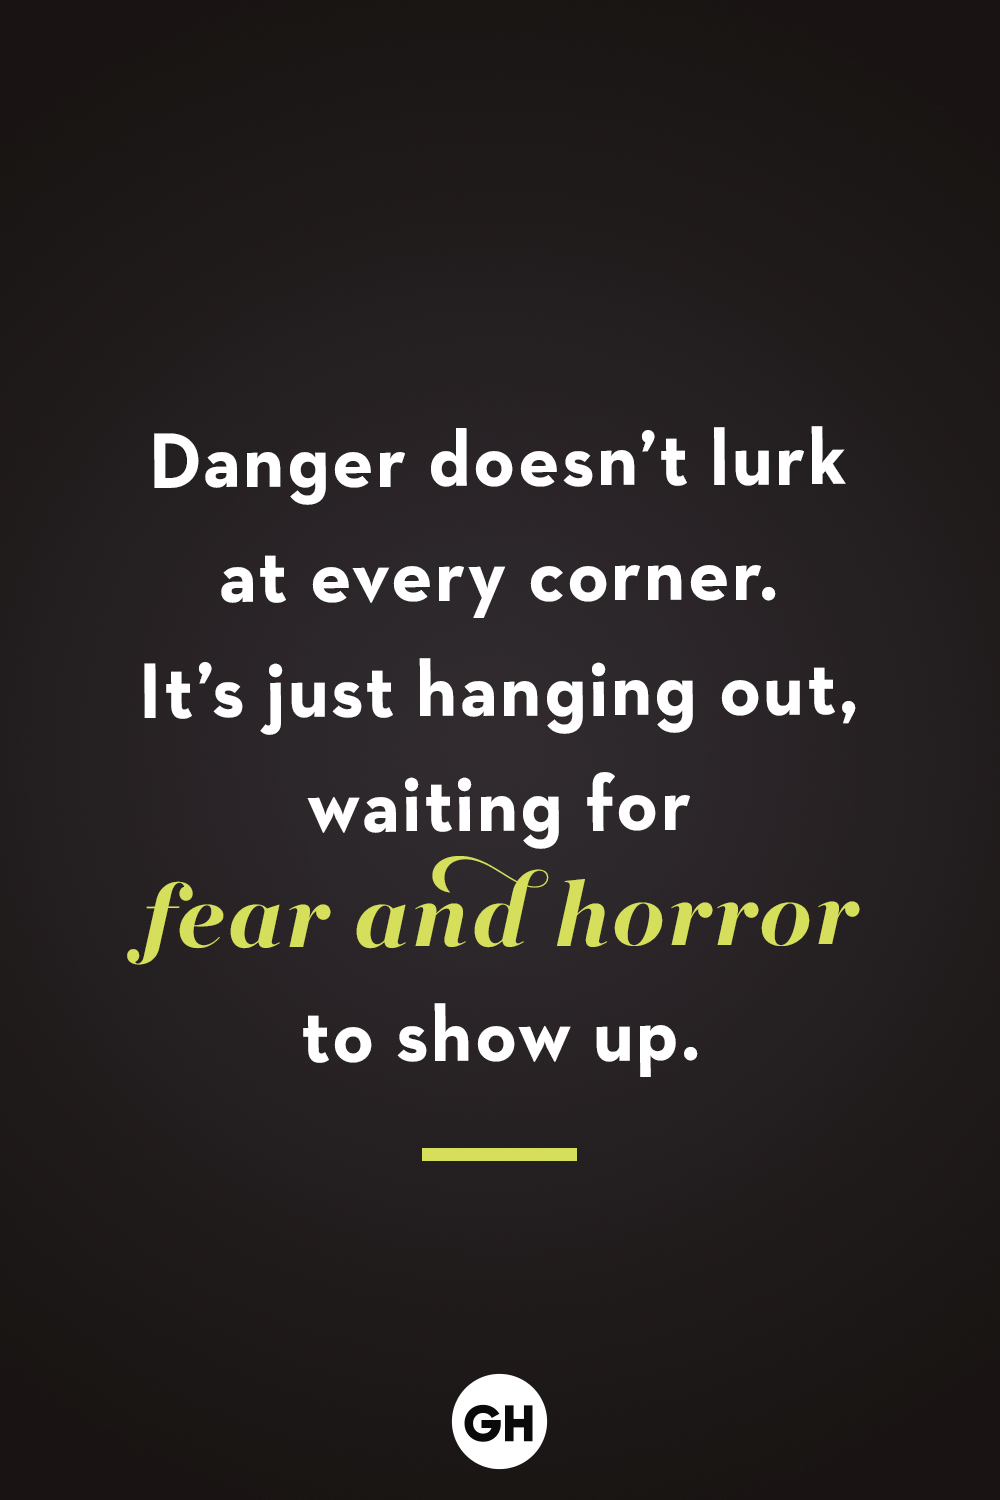 50 Best Scary Quotes Creepy Sayings From Movies Books - scary moments and secrets about roblox top 5 scariest